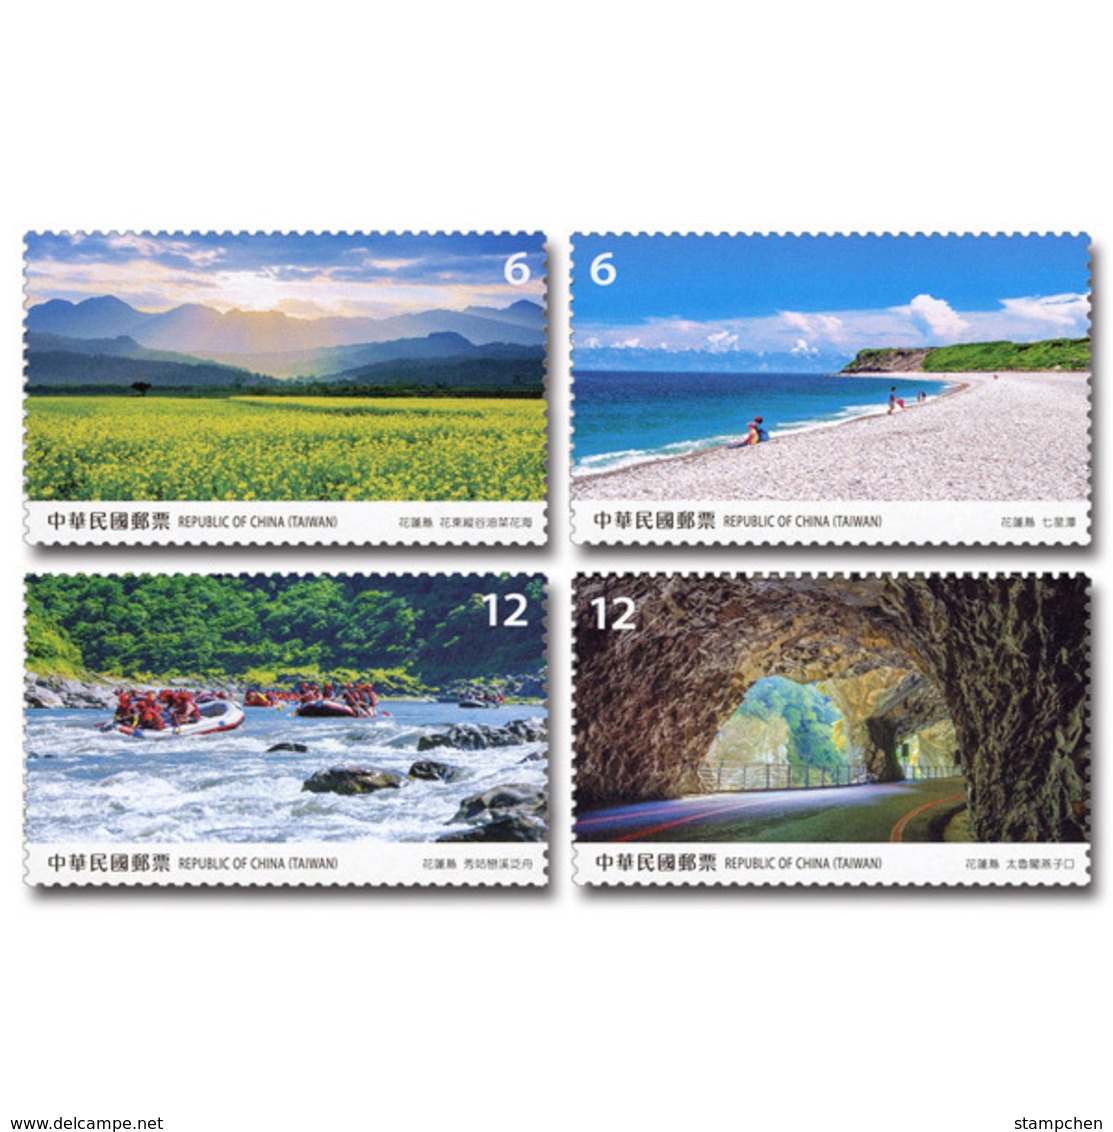 2019 Taiwan Scenery -Hualien Stamps Flower Blossom River Rafting Swallow Bird National Park - Nature